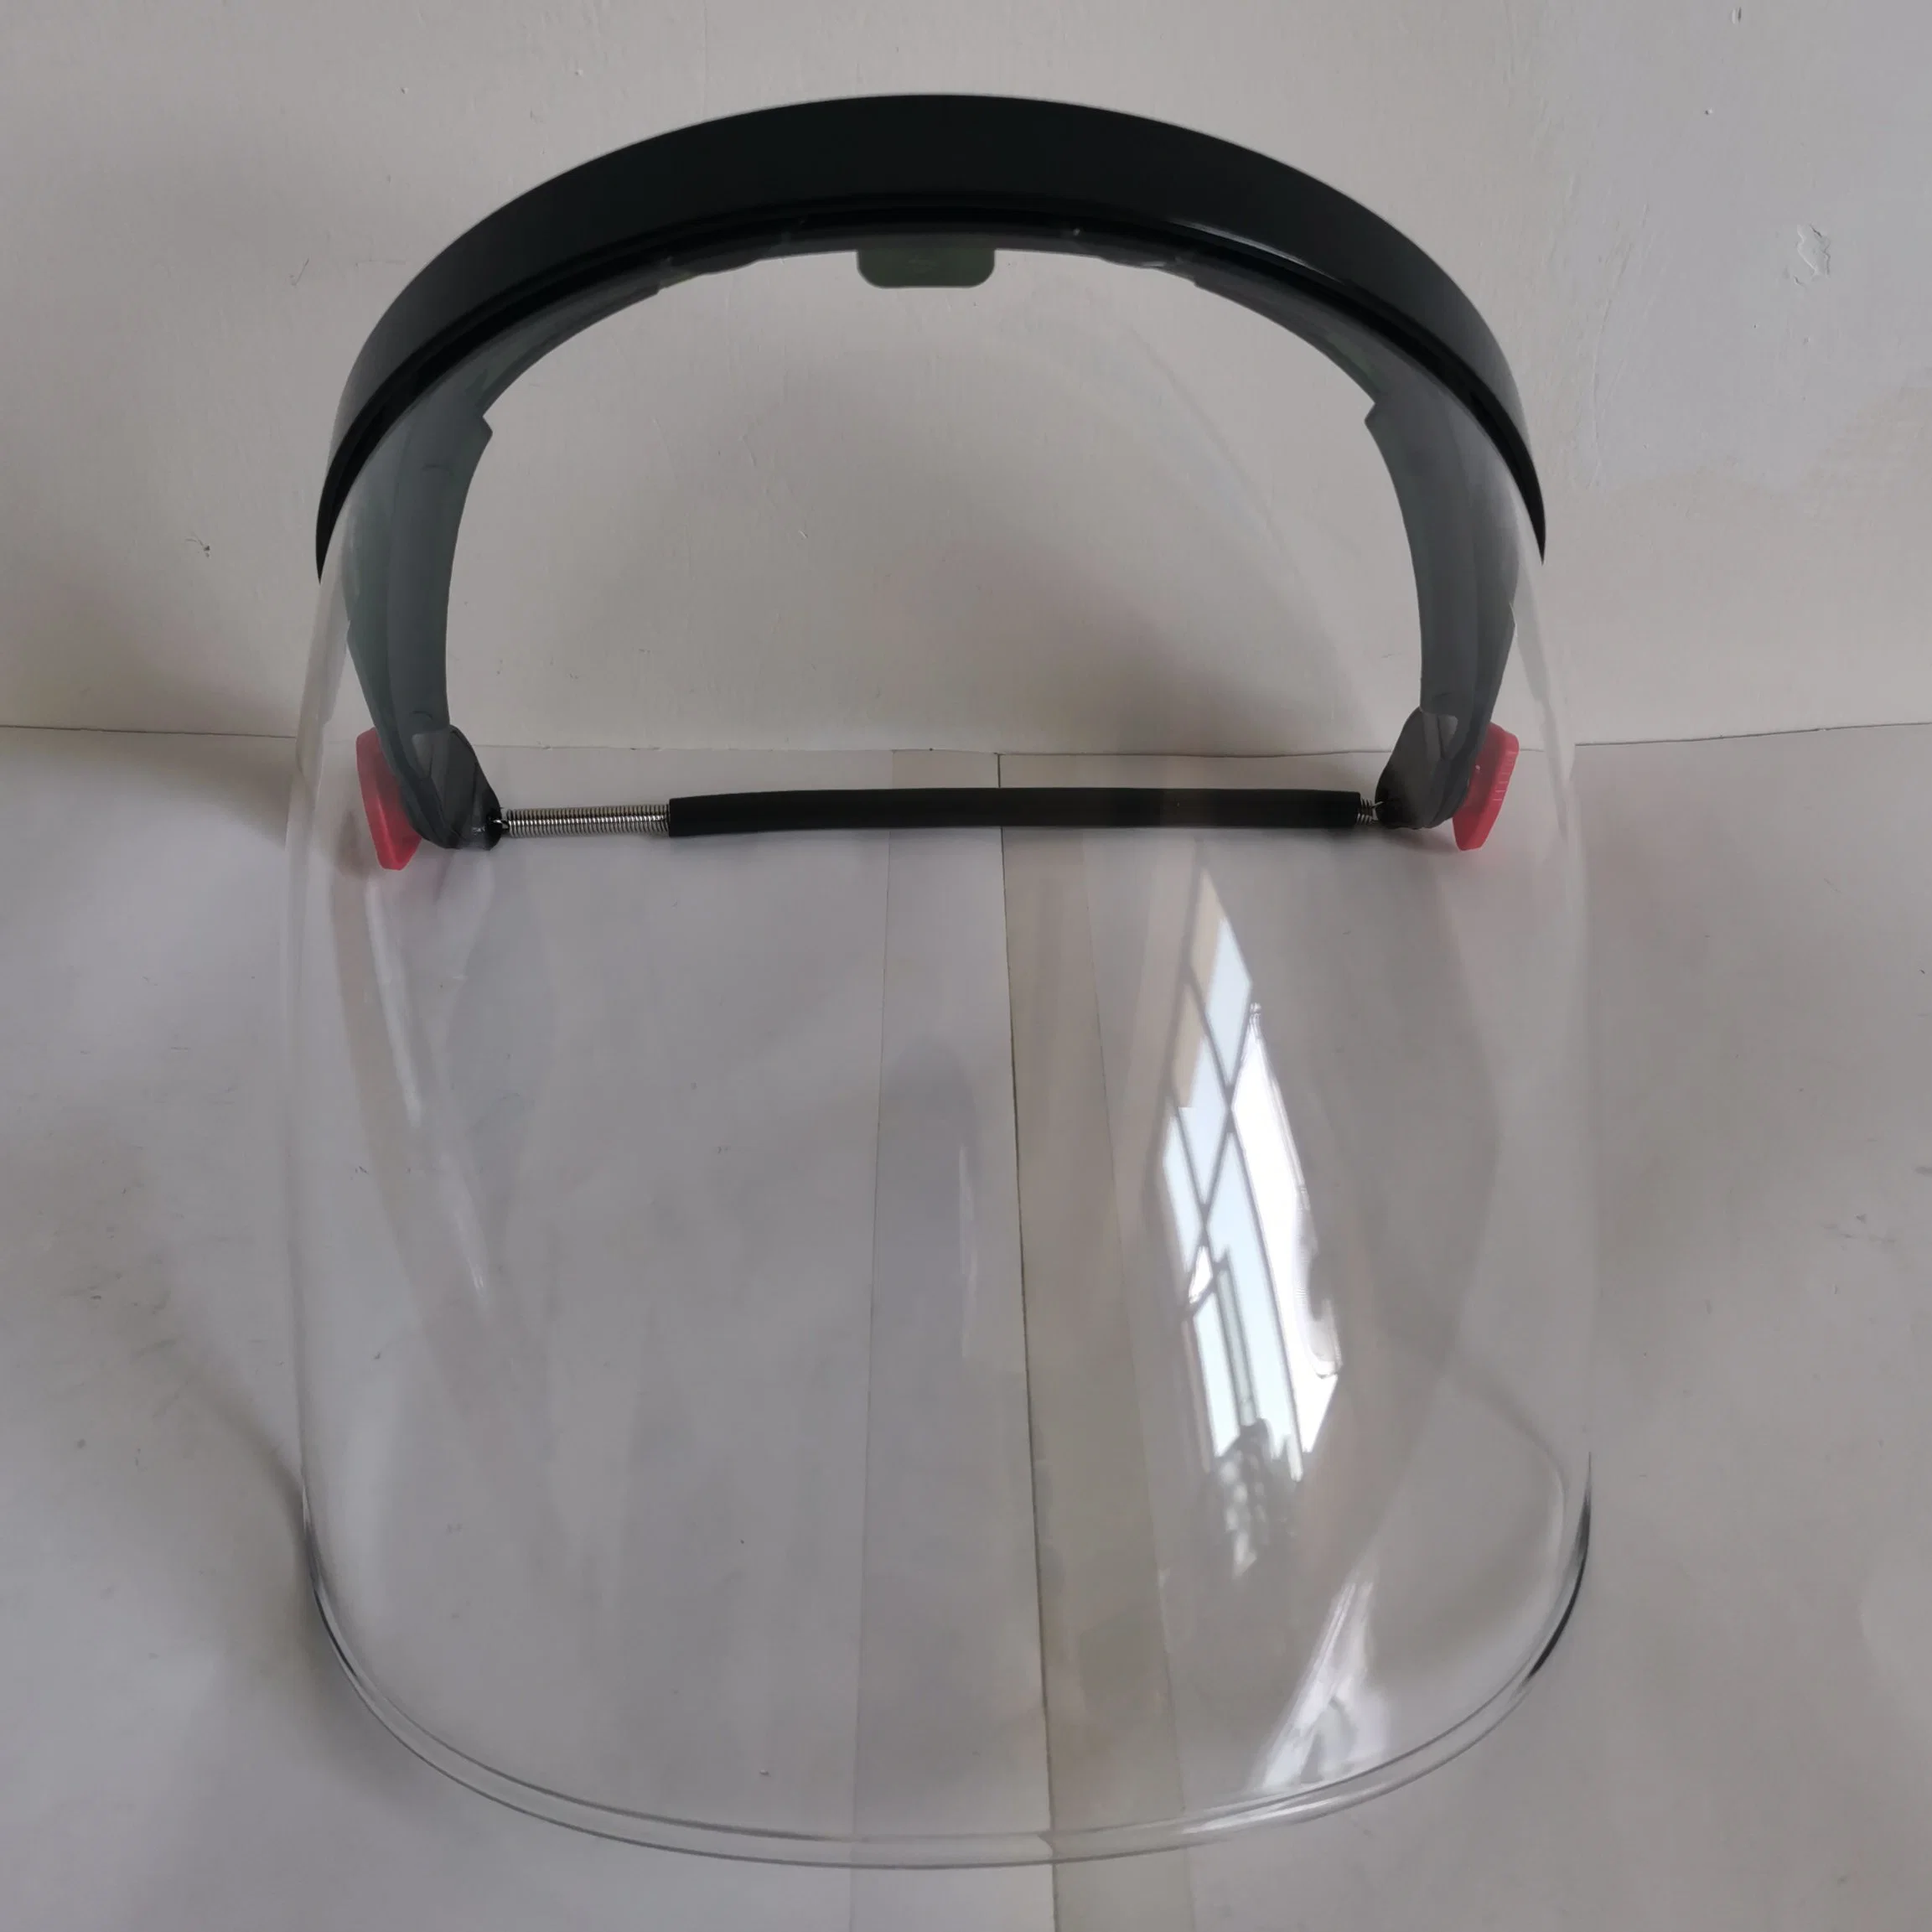 Construction Safety Equipment PC Face Shield Visor Matched with Safety Visor